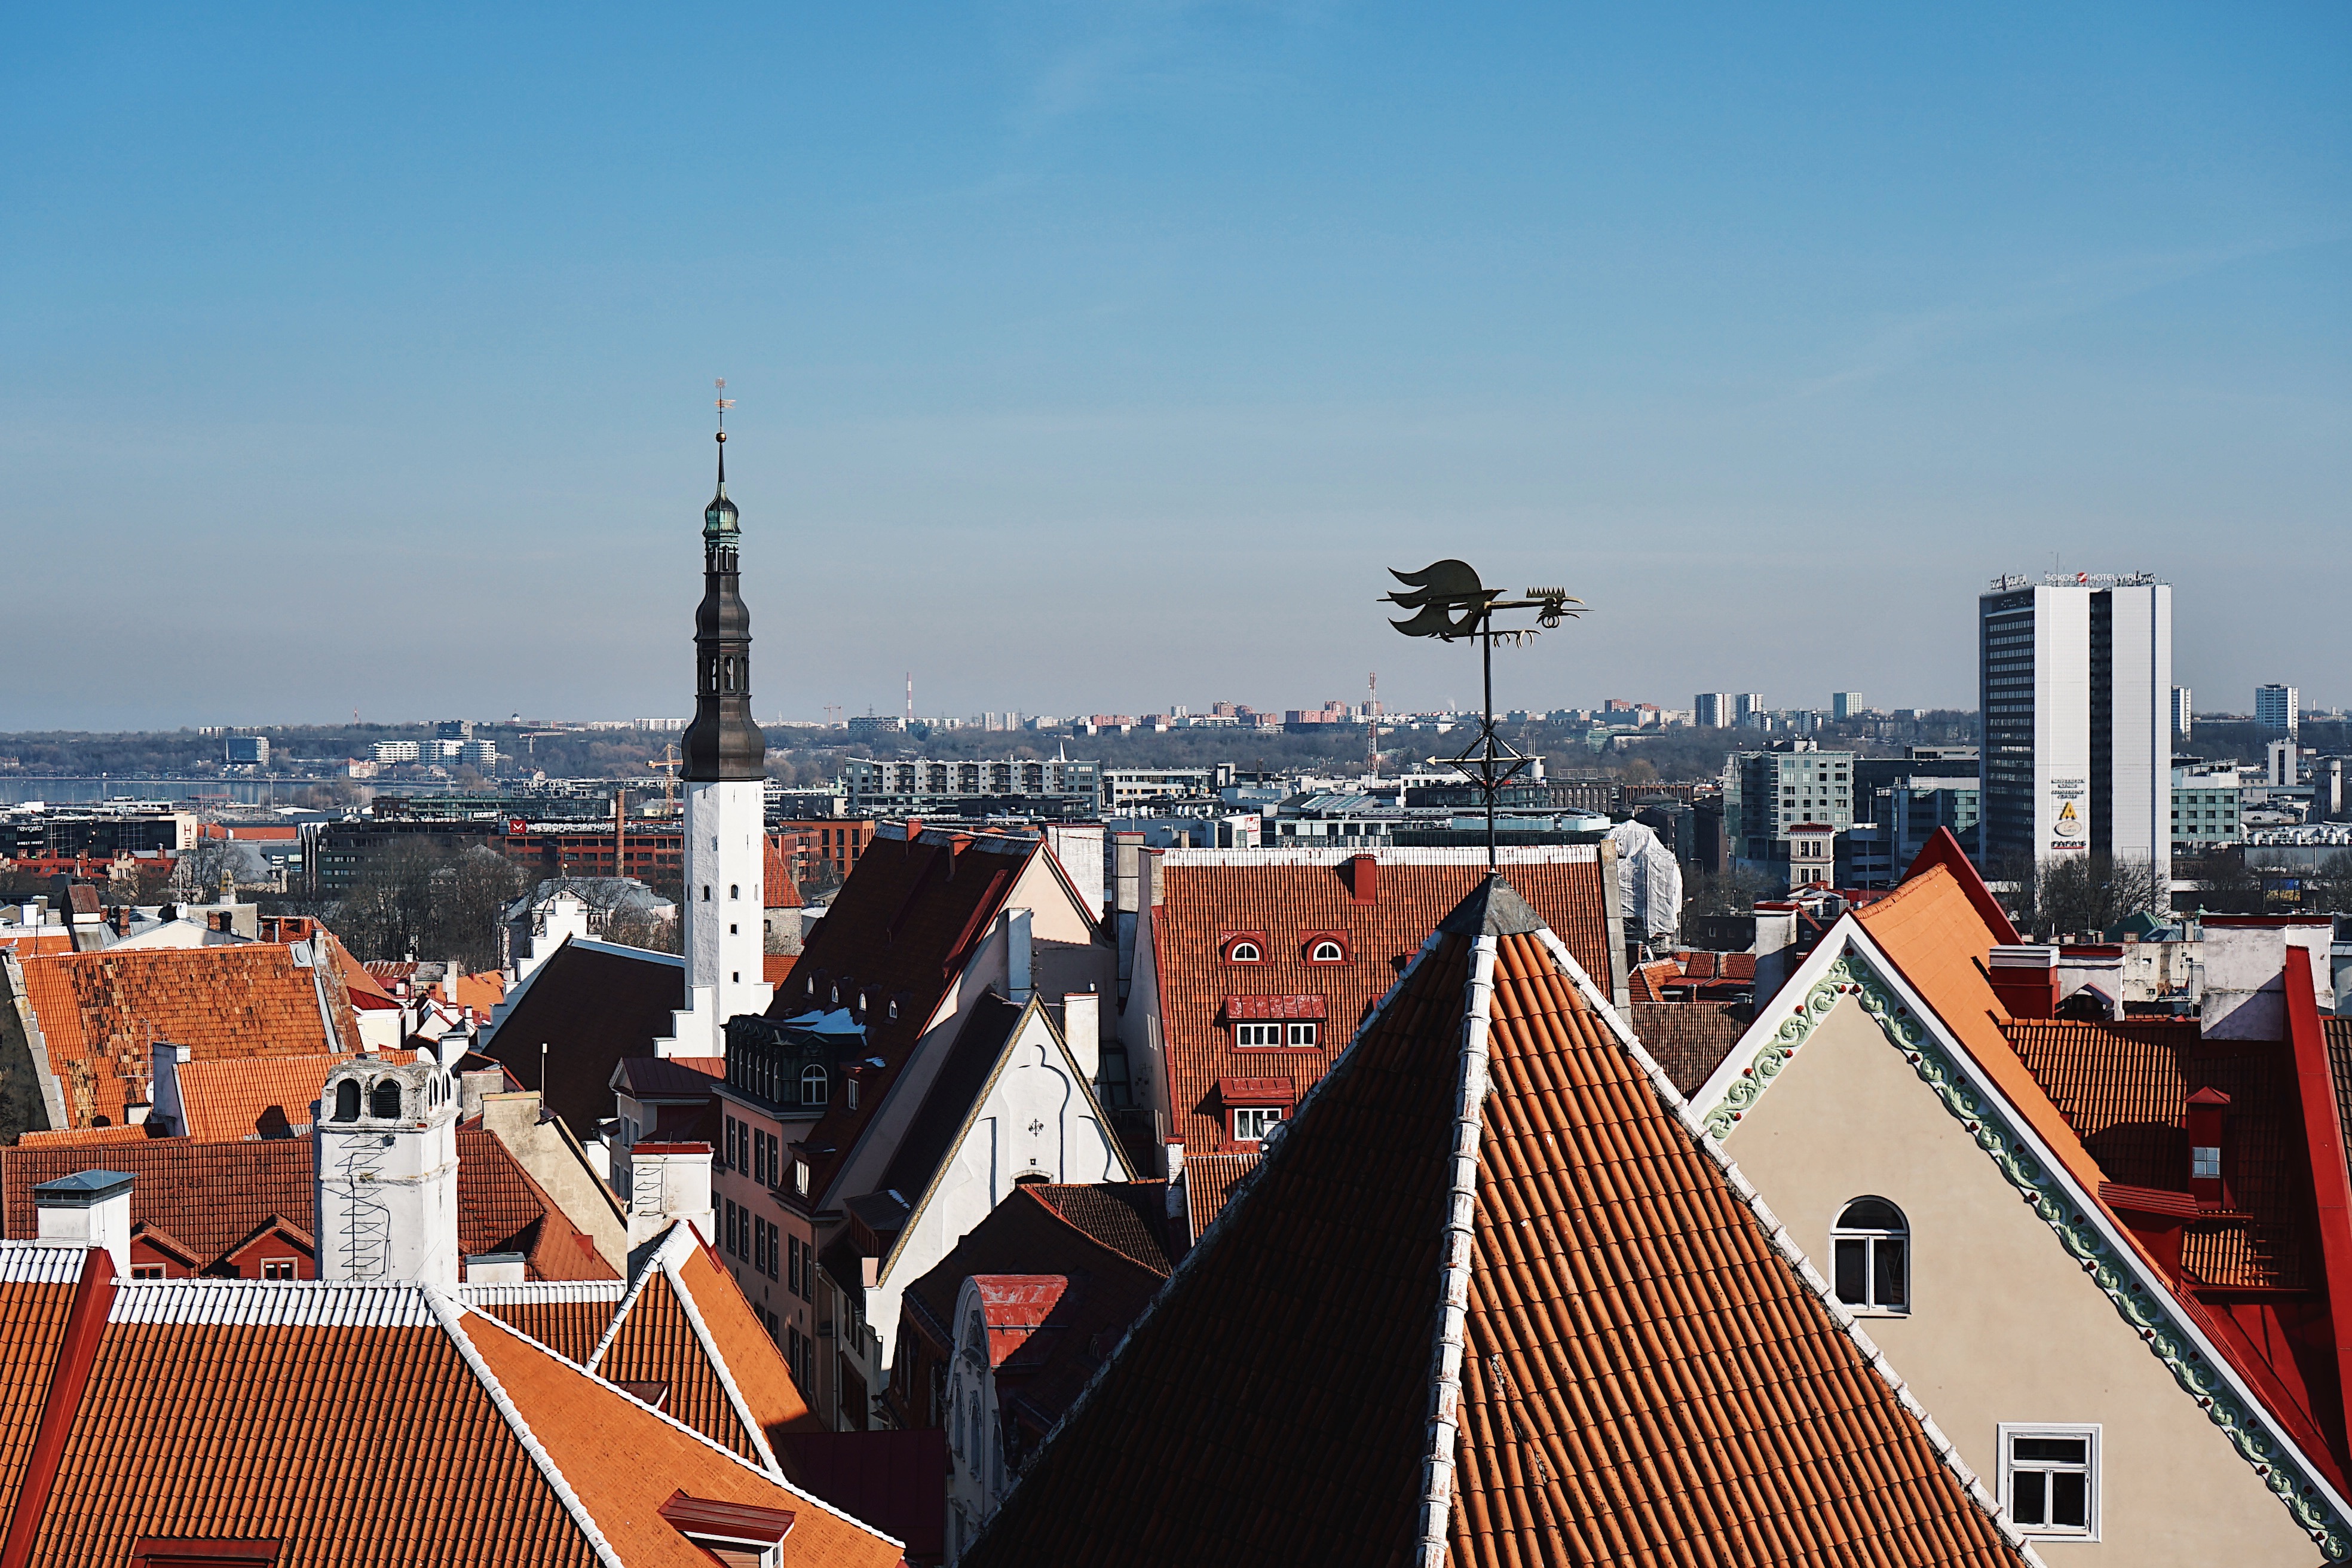 View of a lot of rooftops in Tallinn, Estonia